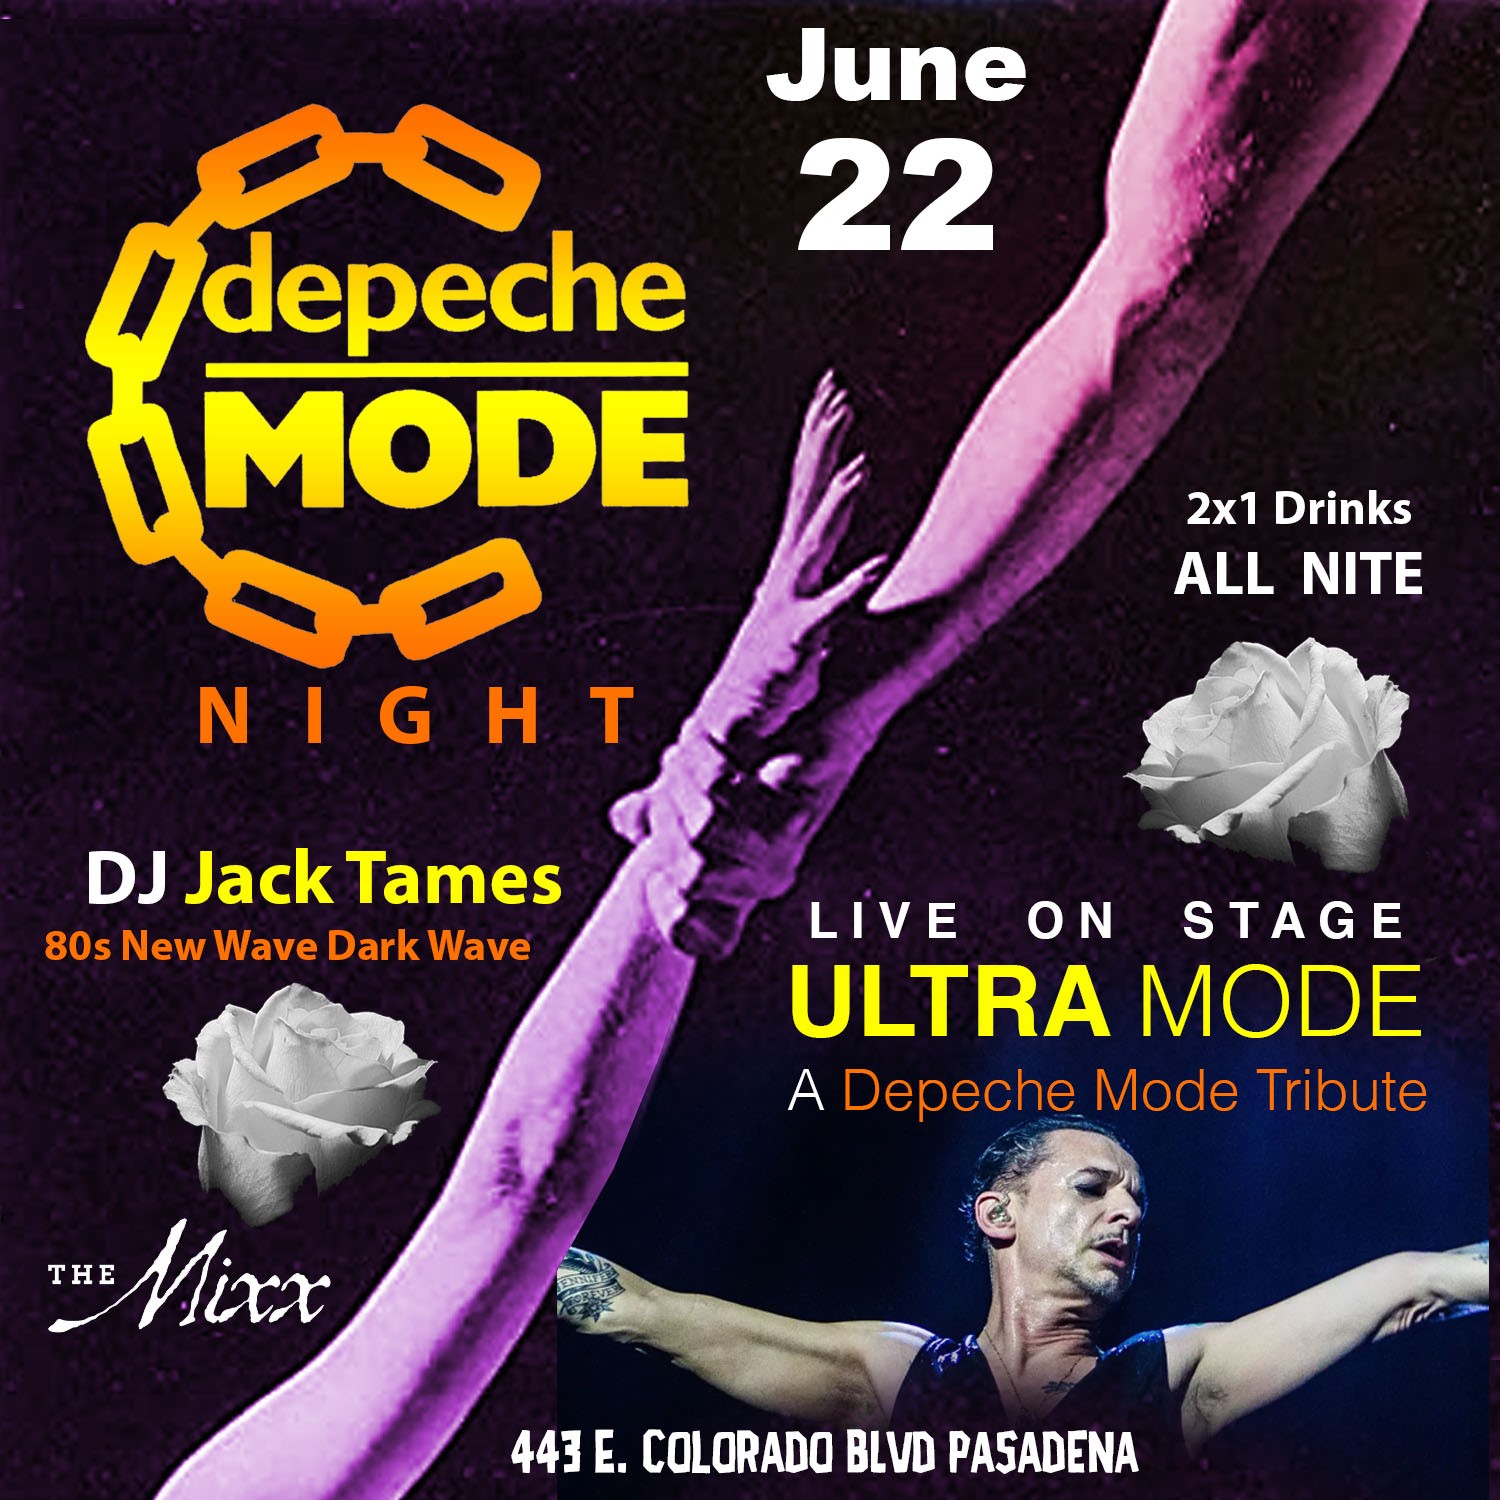 You are currently viewing Depeche Mode Night with ULTRA MODE a Depeche Mode